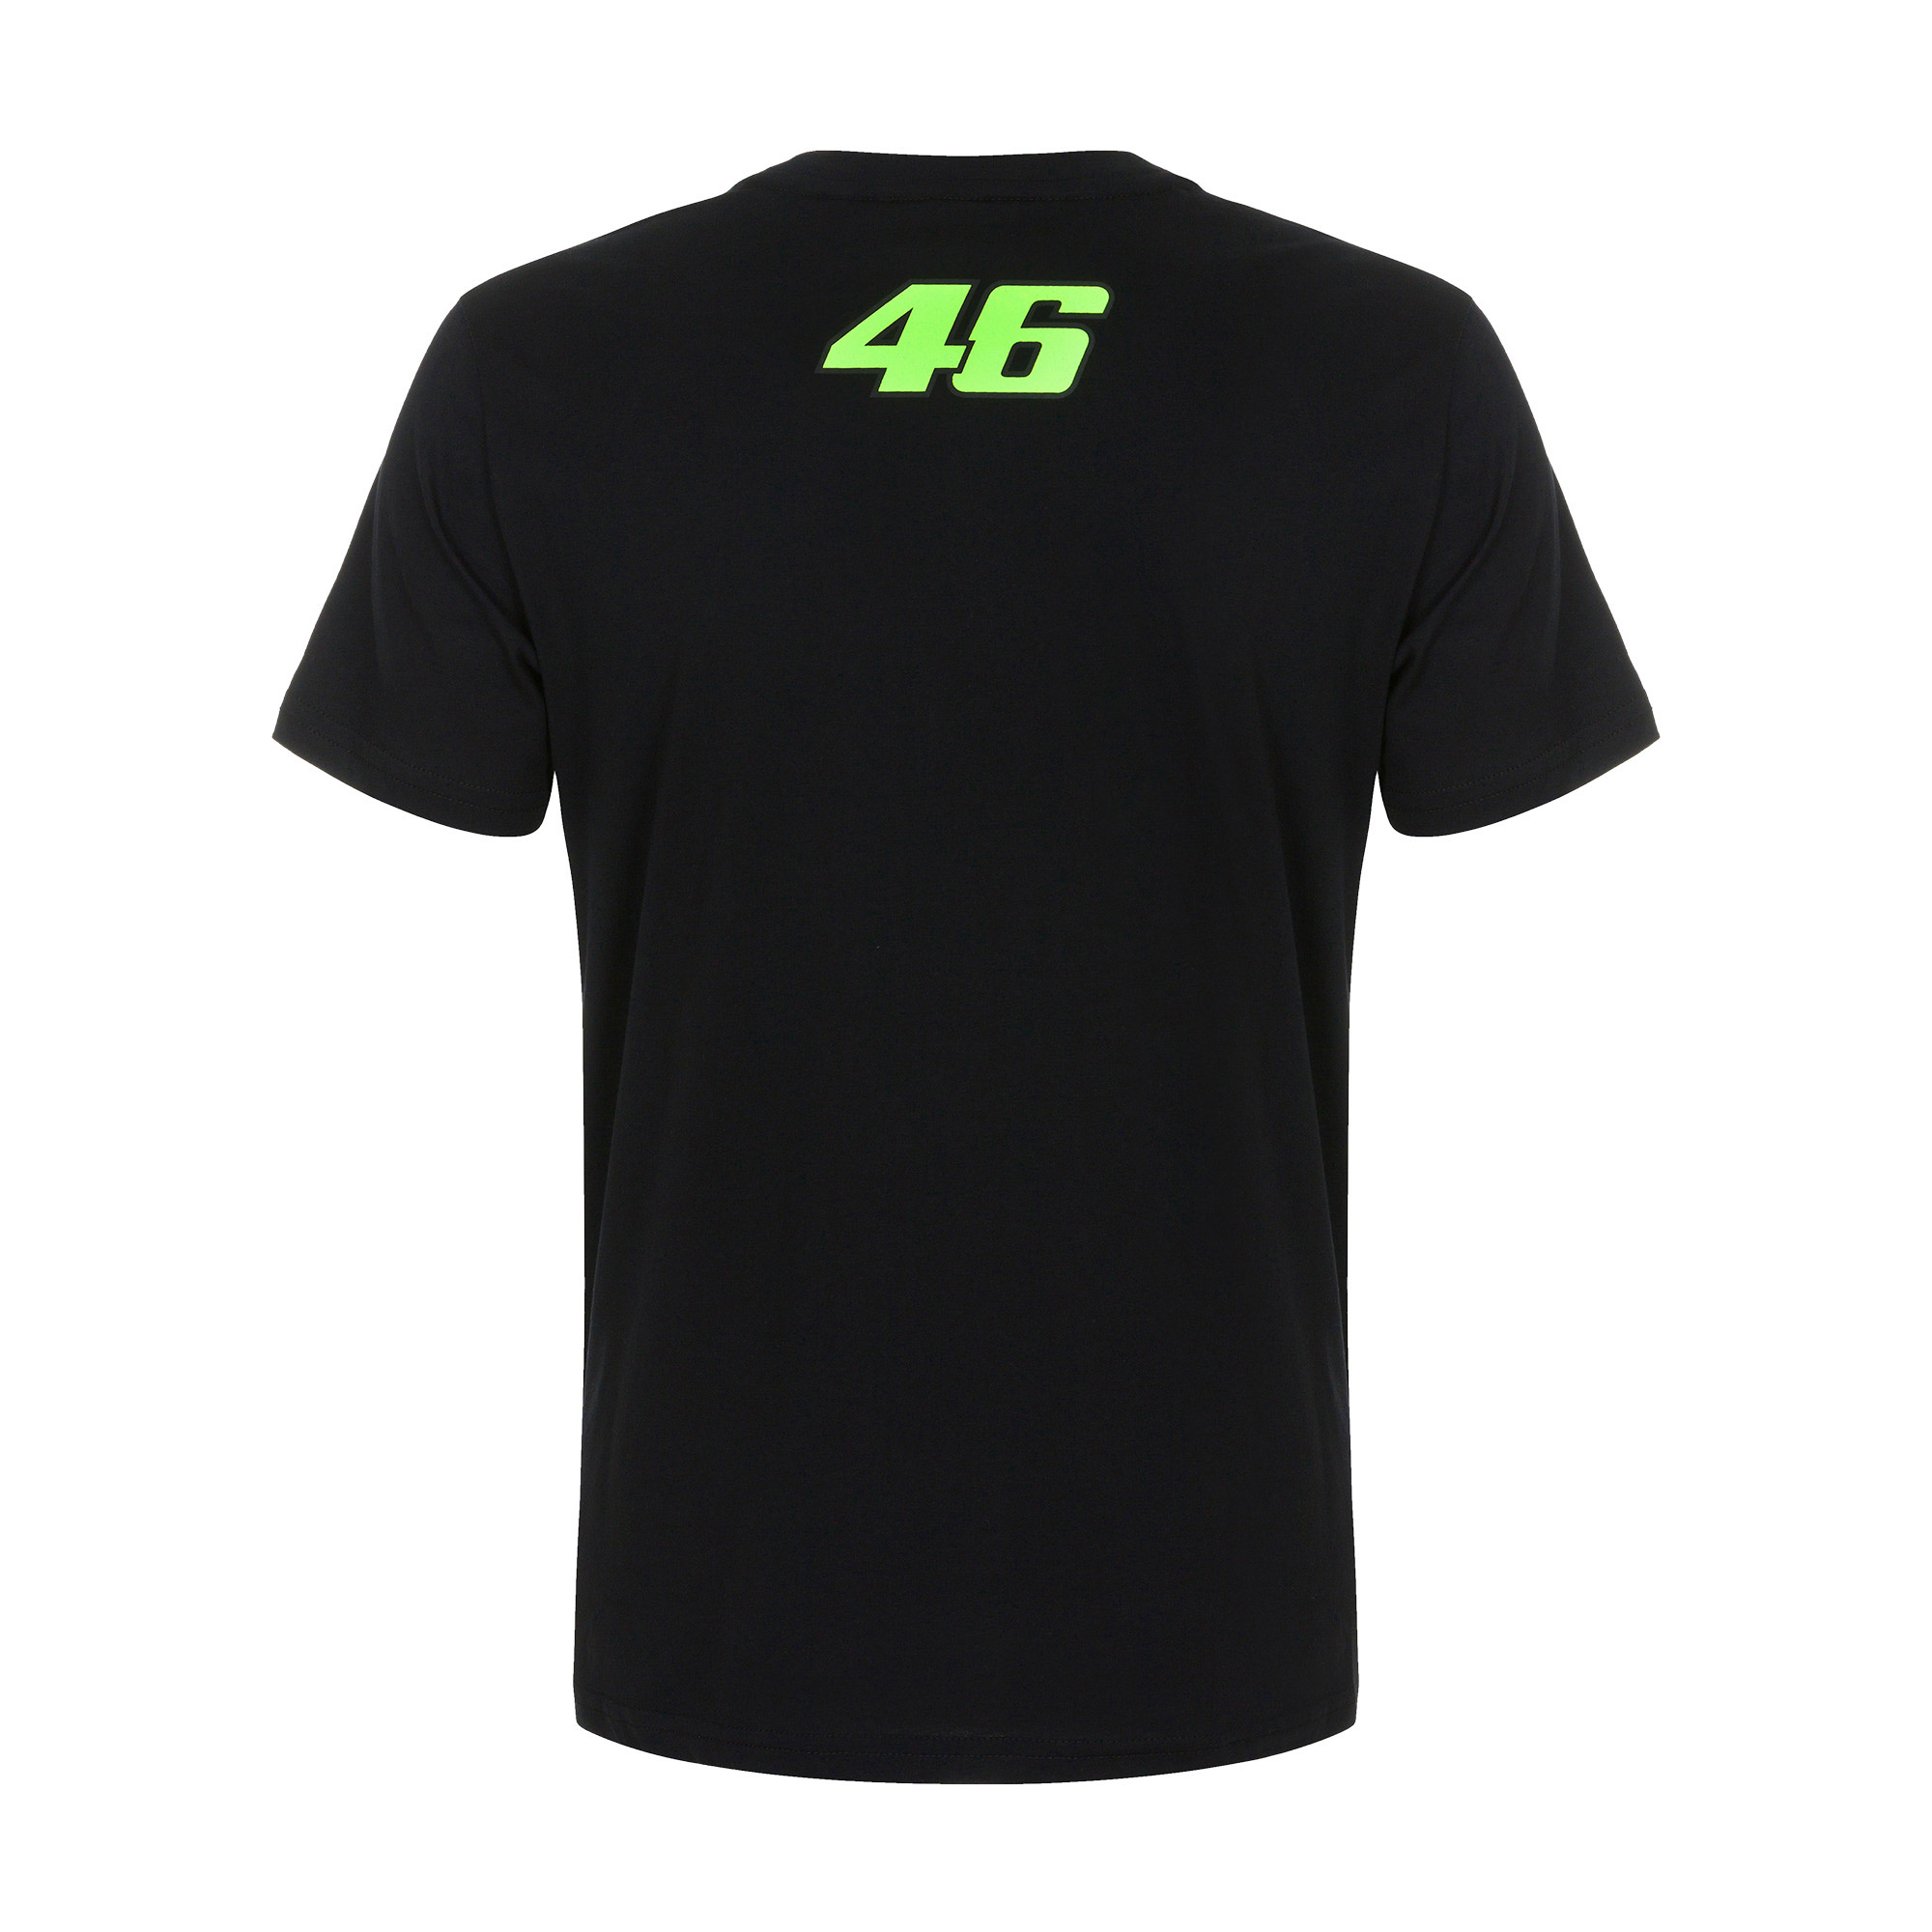 Valentino Rossi T-Shirt "46 The Doctor" - black